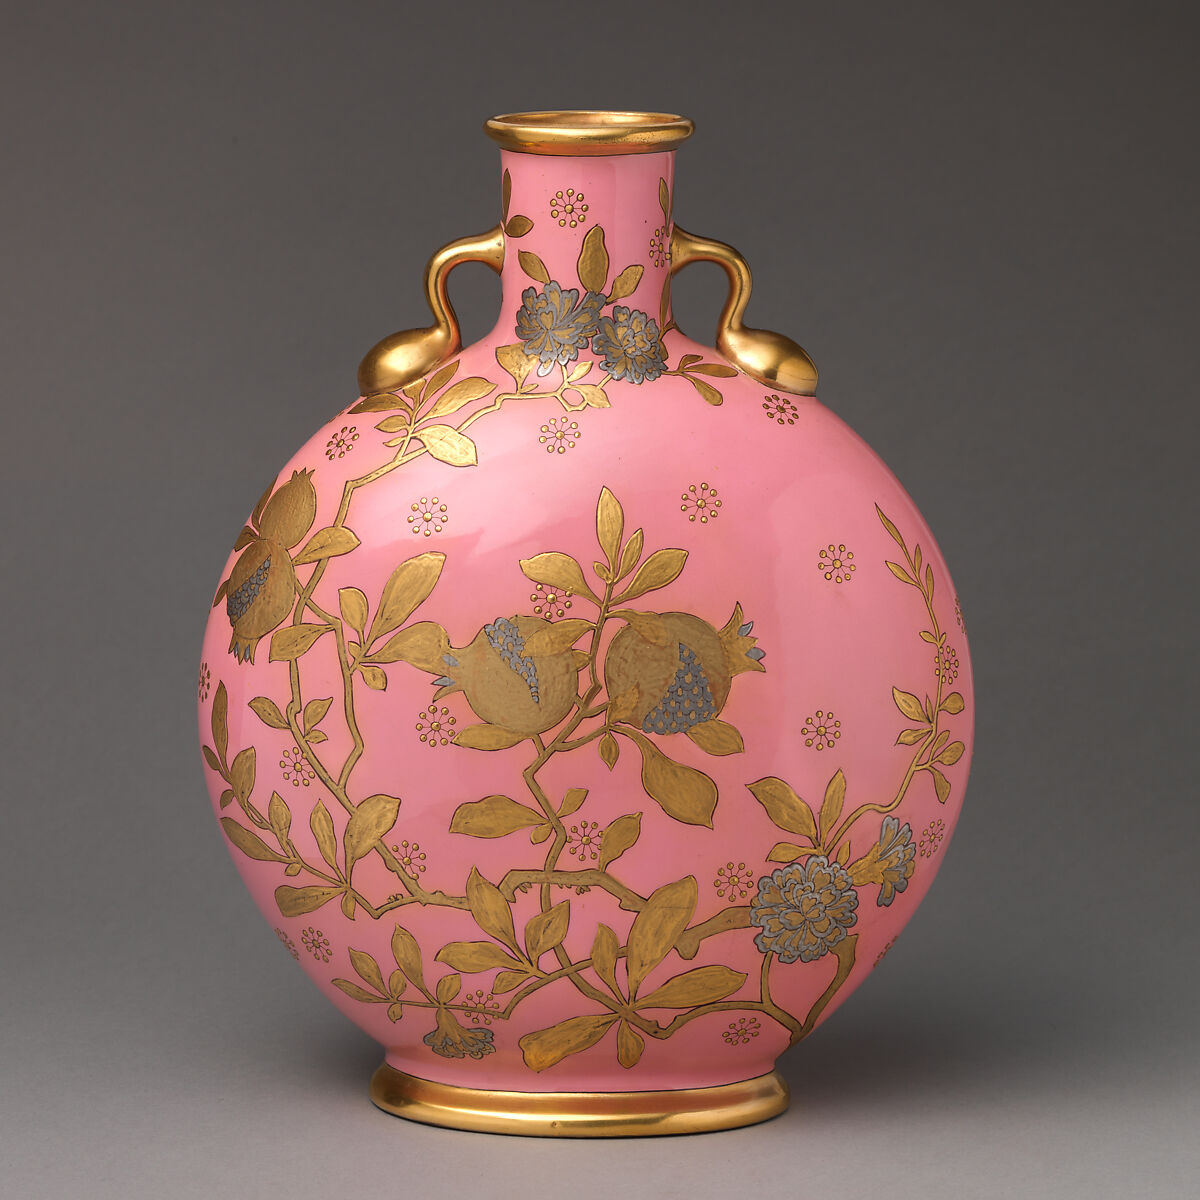 Moon flask with gilt floral decoration on pink ground, Minton(s) (British, Stoke-on-Trent, 1793–present), Bone china, British, Stoke-on-Trent, Staffordshire 